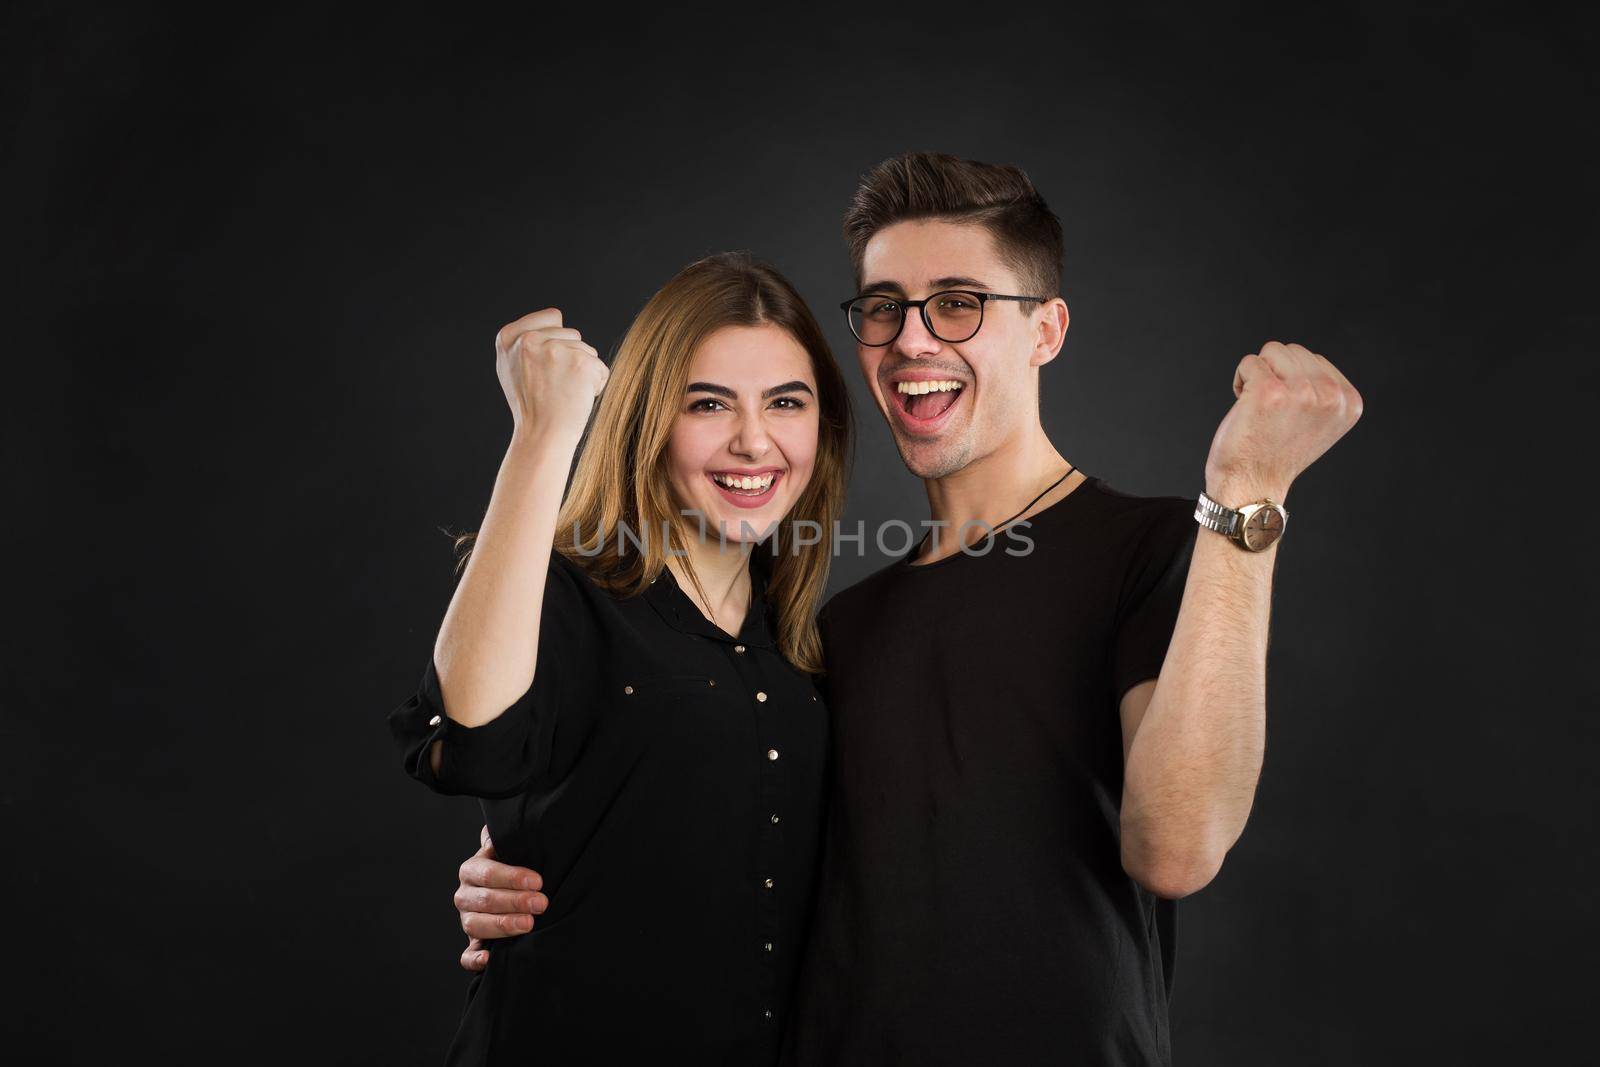 Yes We did it Cheerful couple is celebrating with raised hands, standing on black background in shirt People, happiness, winning, victory, success and good luck by StudioPeace